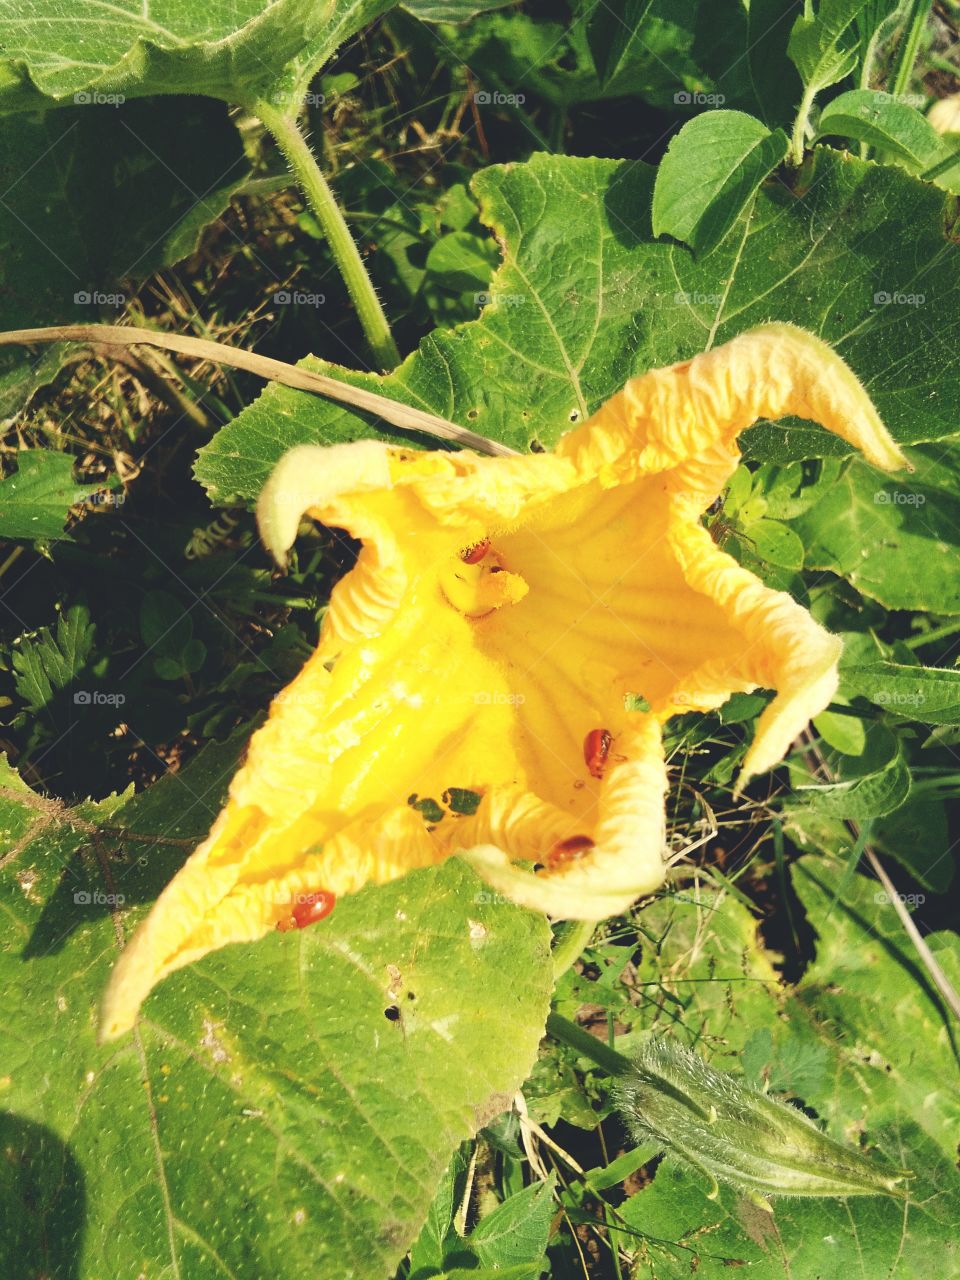 the pumpkin flower is beautiful and amazing flower